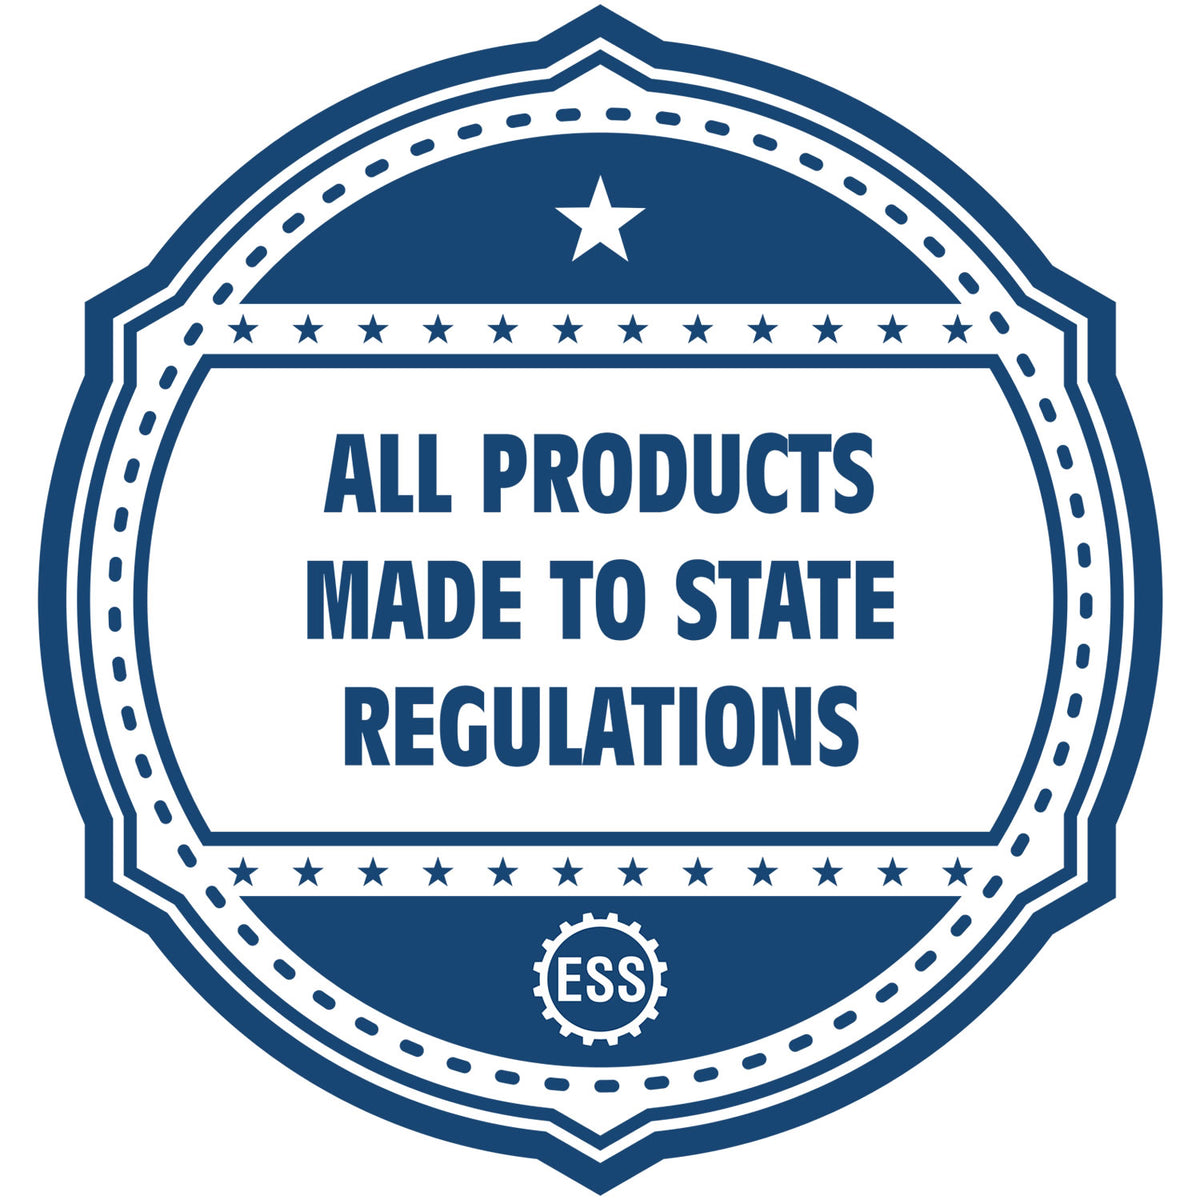 An icon or badge element for the Slim Pre-Inked Oklahoma Landscape Architect Seal Stamp showing that this product is made in compliance with state regulations.